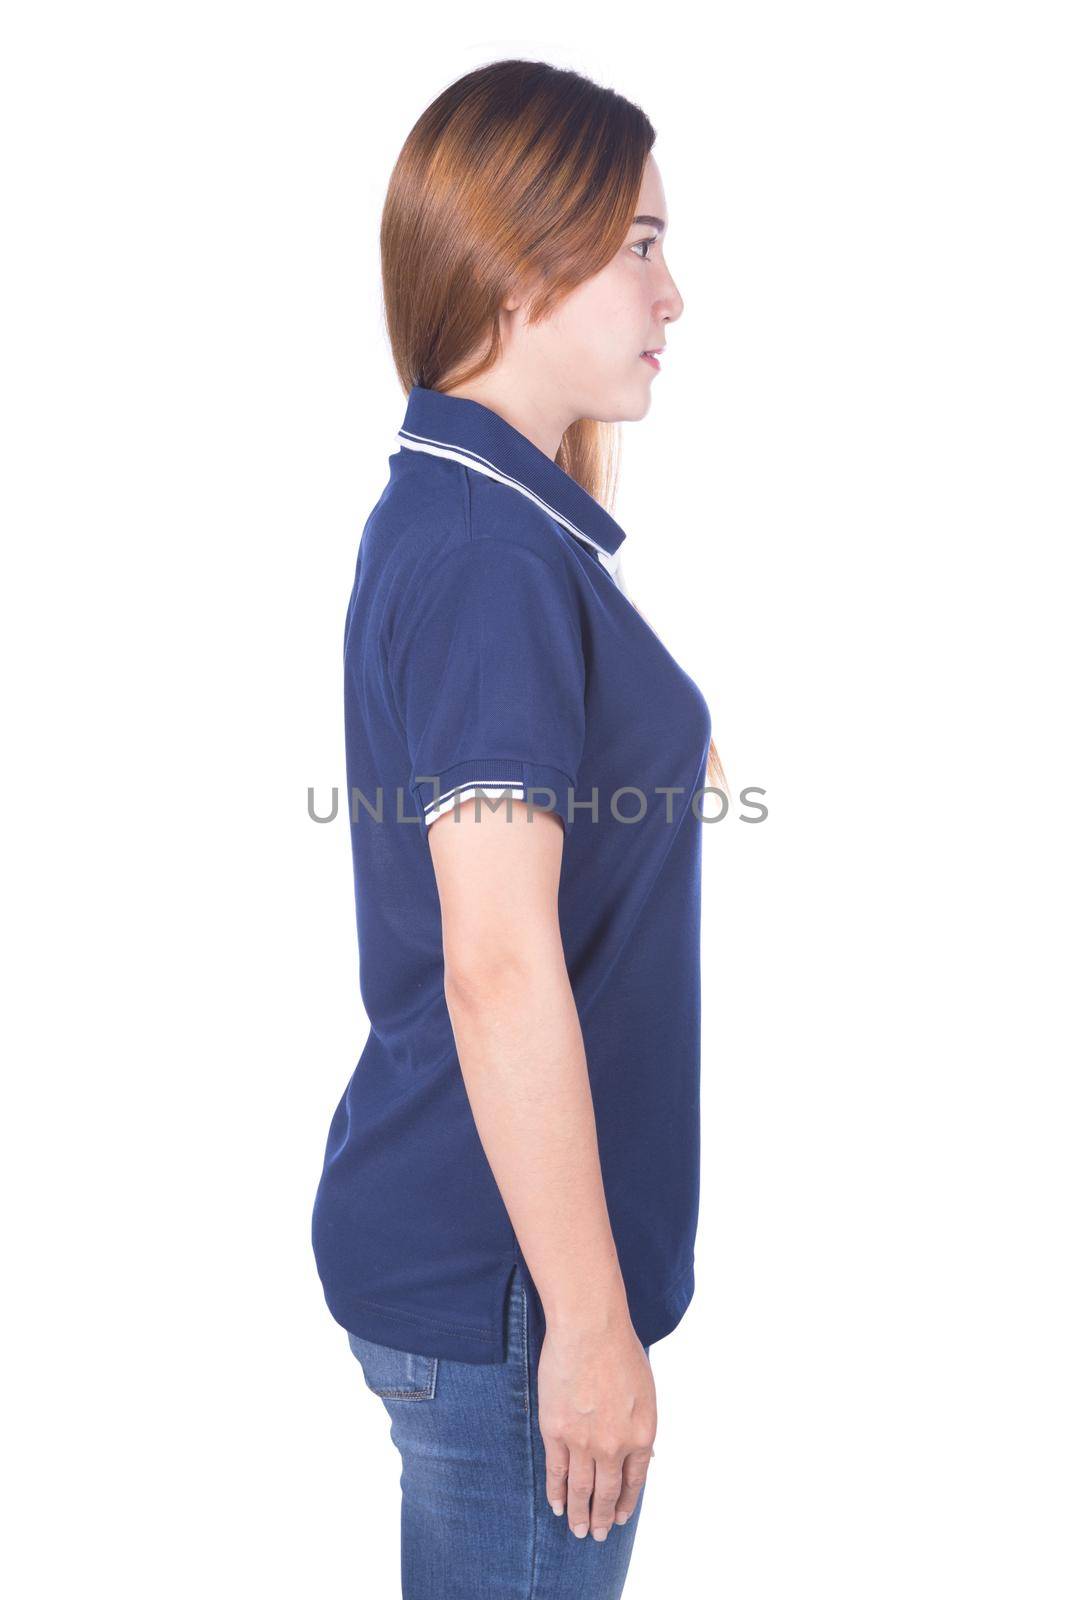 woman in blue polo shirt isolated on a white background (side view)